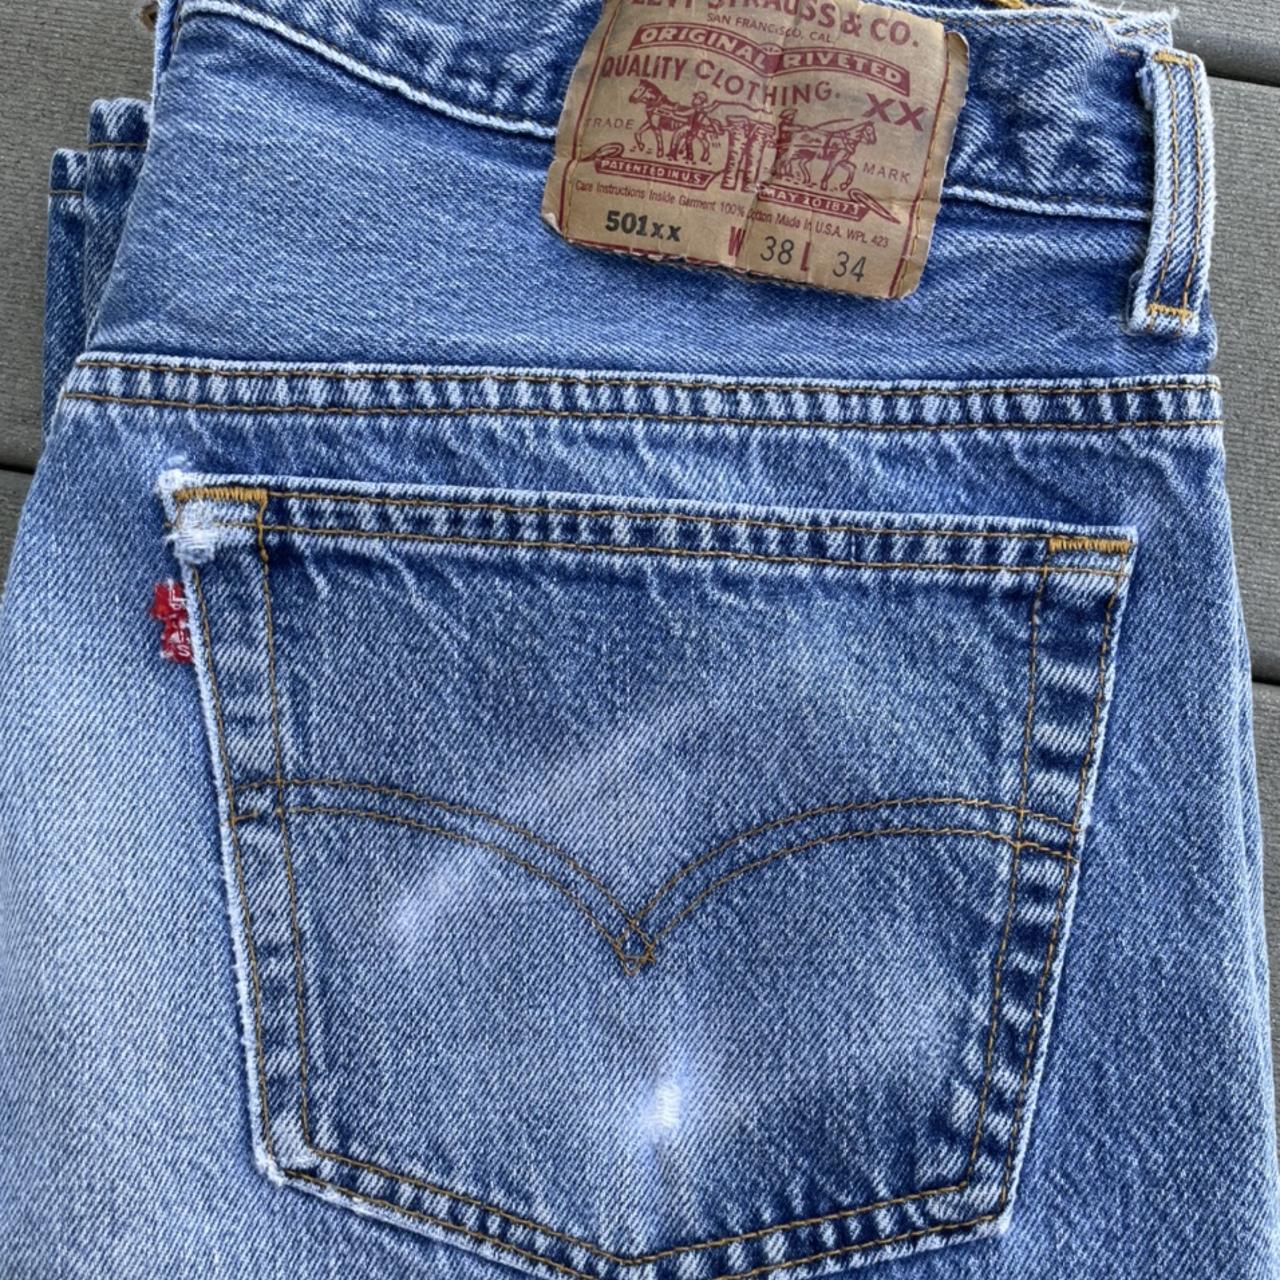 90s Levi's 501xx  made in USA